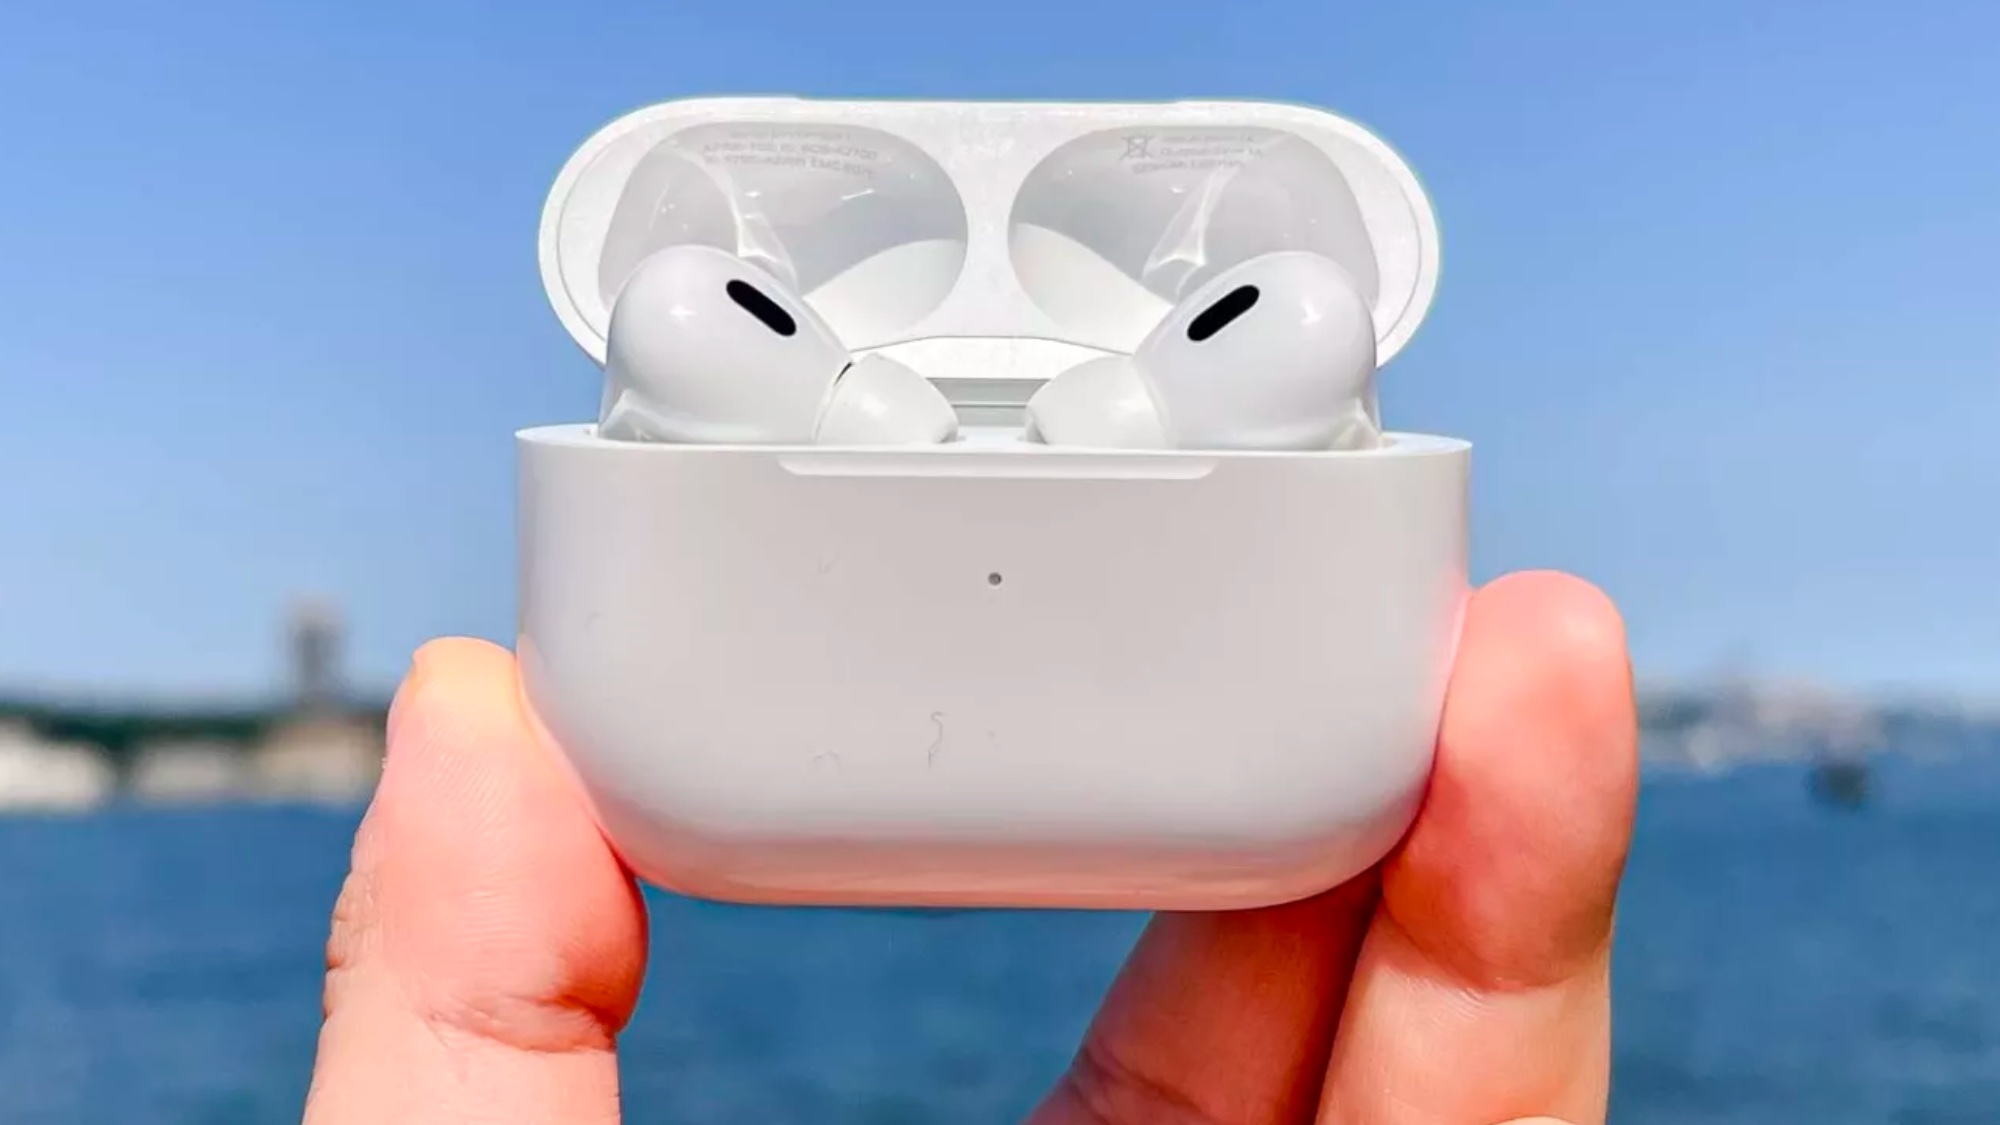 Gagnants des Tom's Guide Awards 2023 : Apple AirPods Pro 2